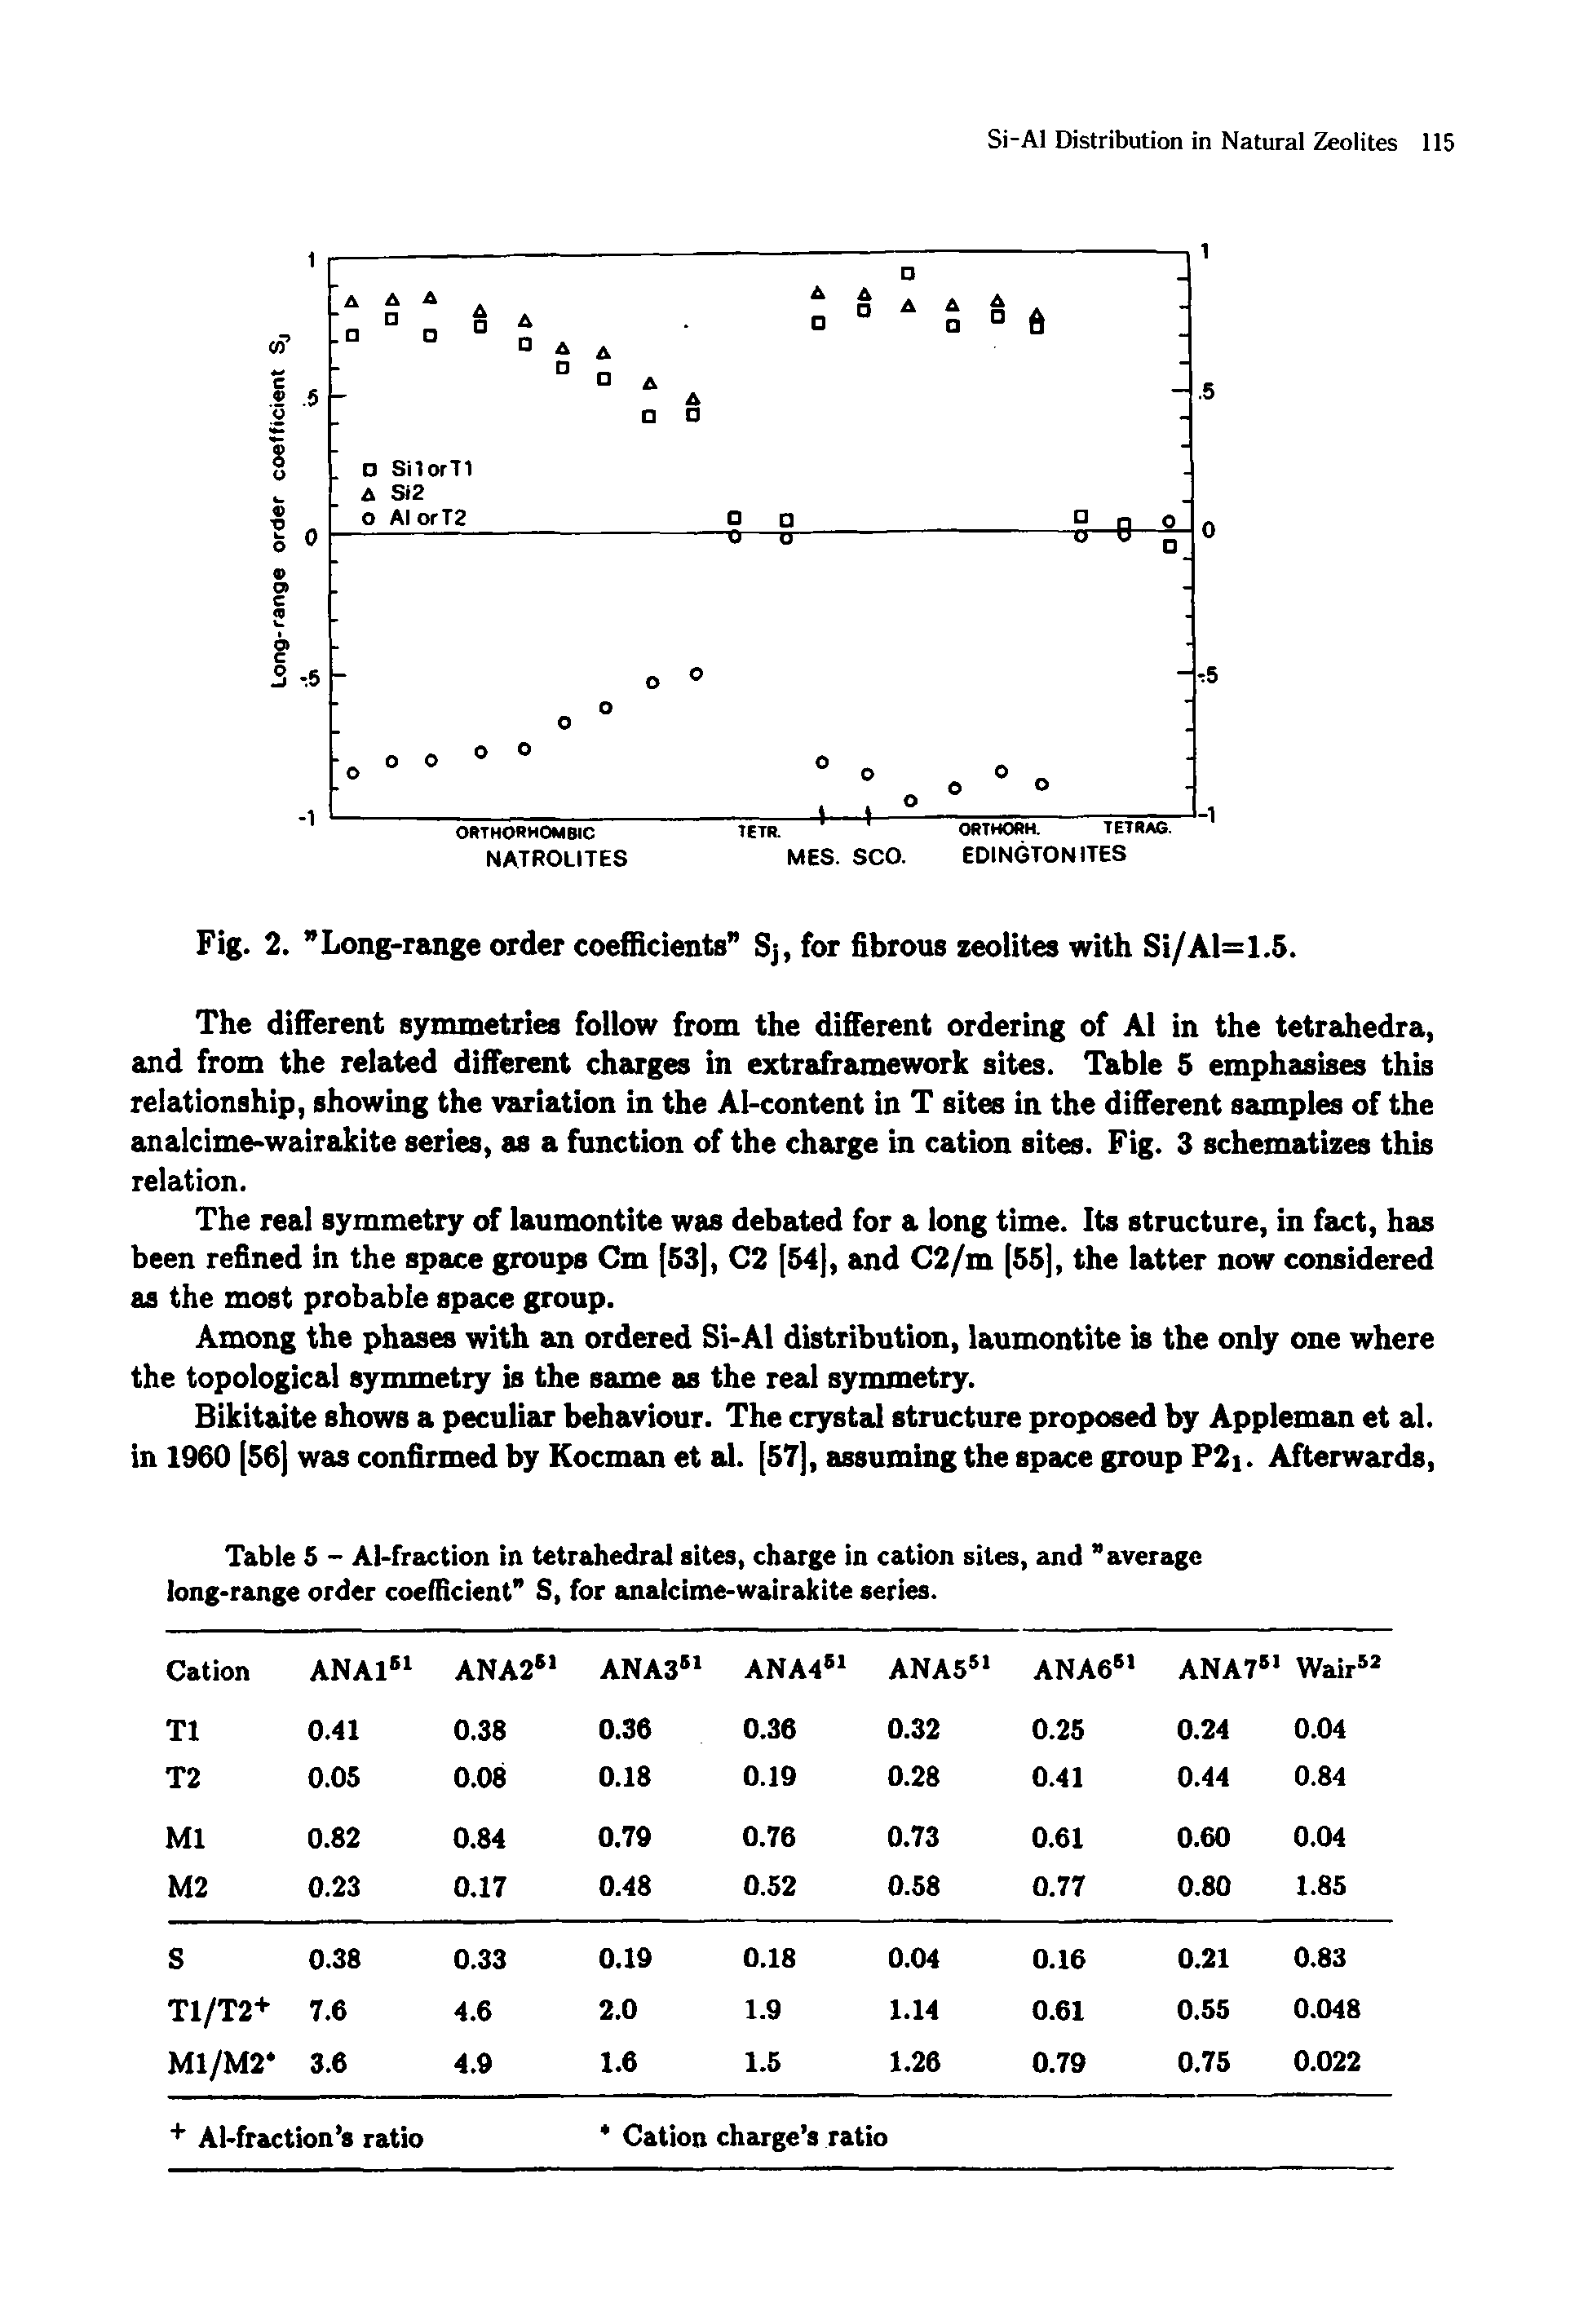 Table 5 - Ai-fraction in tetrahedral sites, charge in cation sites, and "average long-range order coefficient S, for analcime-wairakite series.